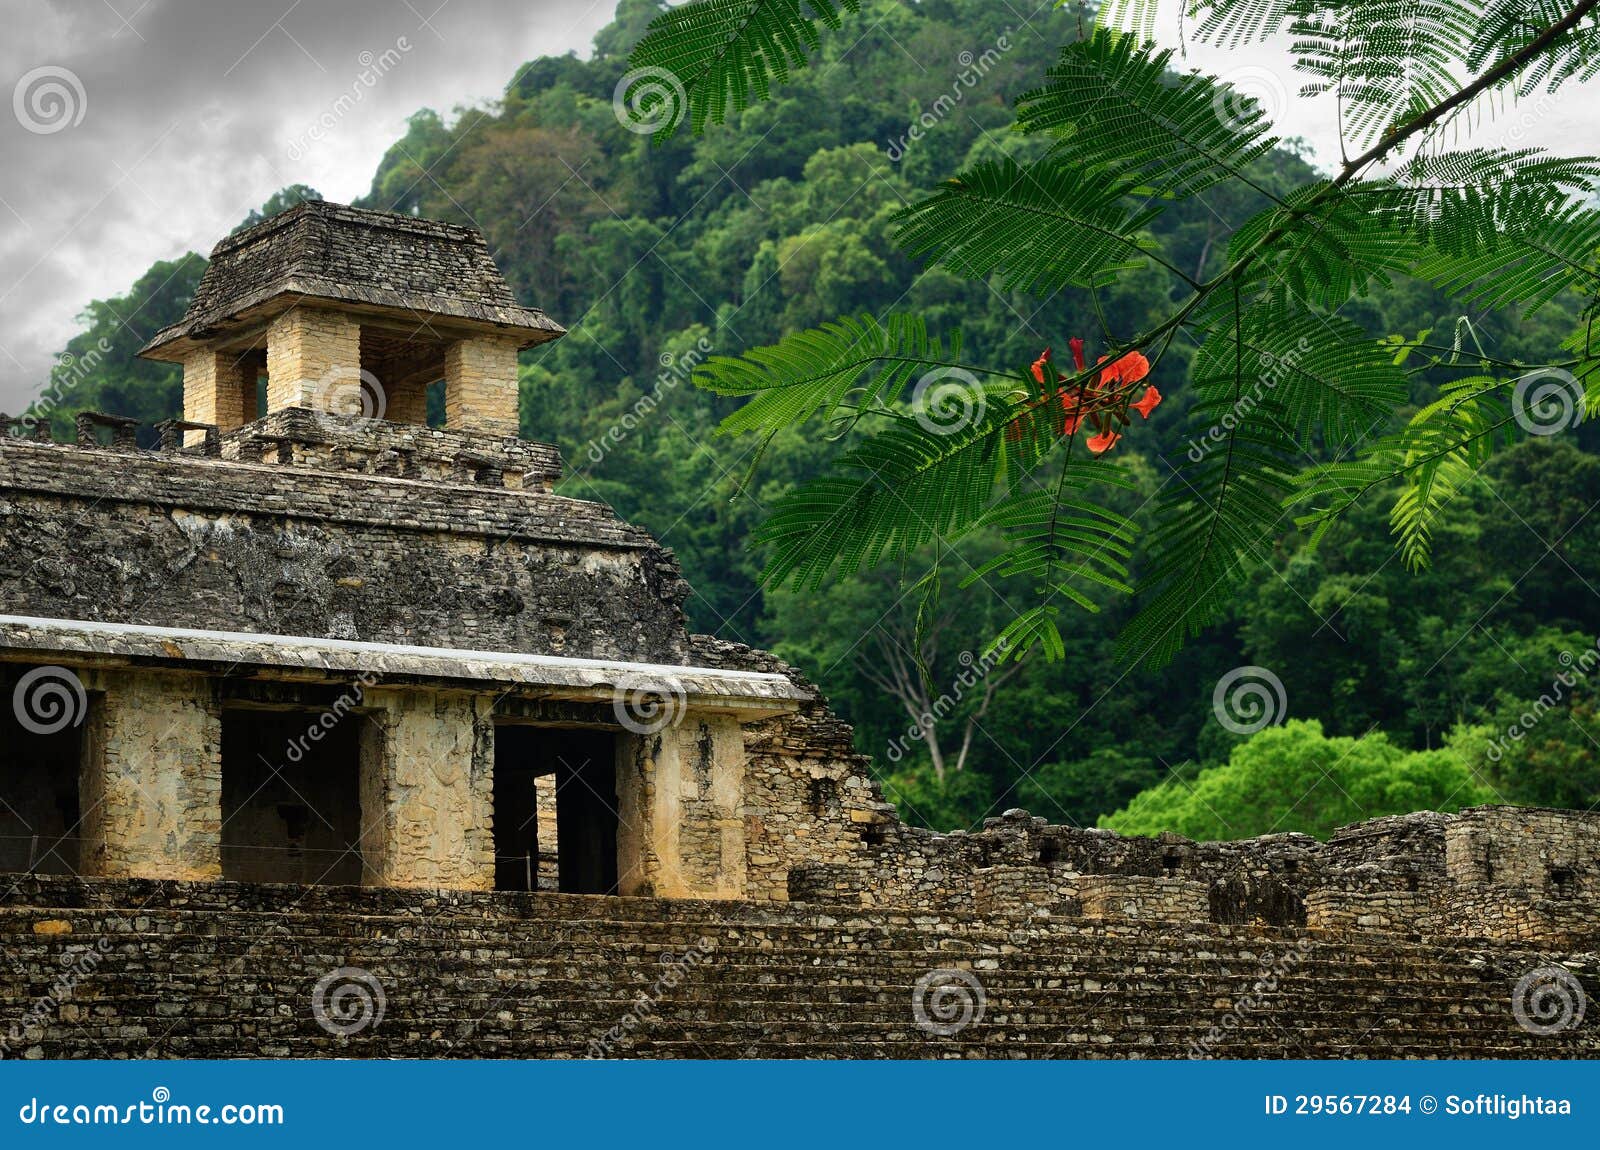 the ruins of the ancient mayan city of palenque, mexico